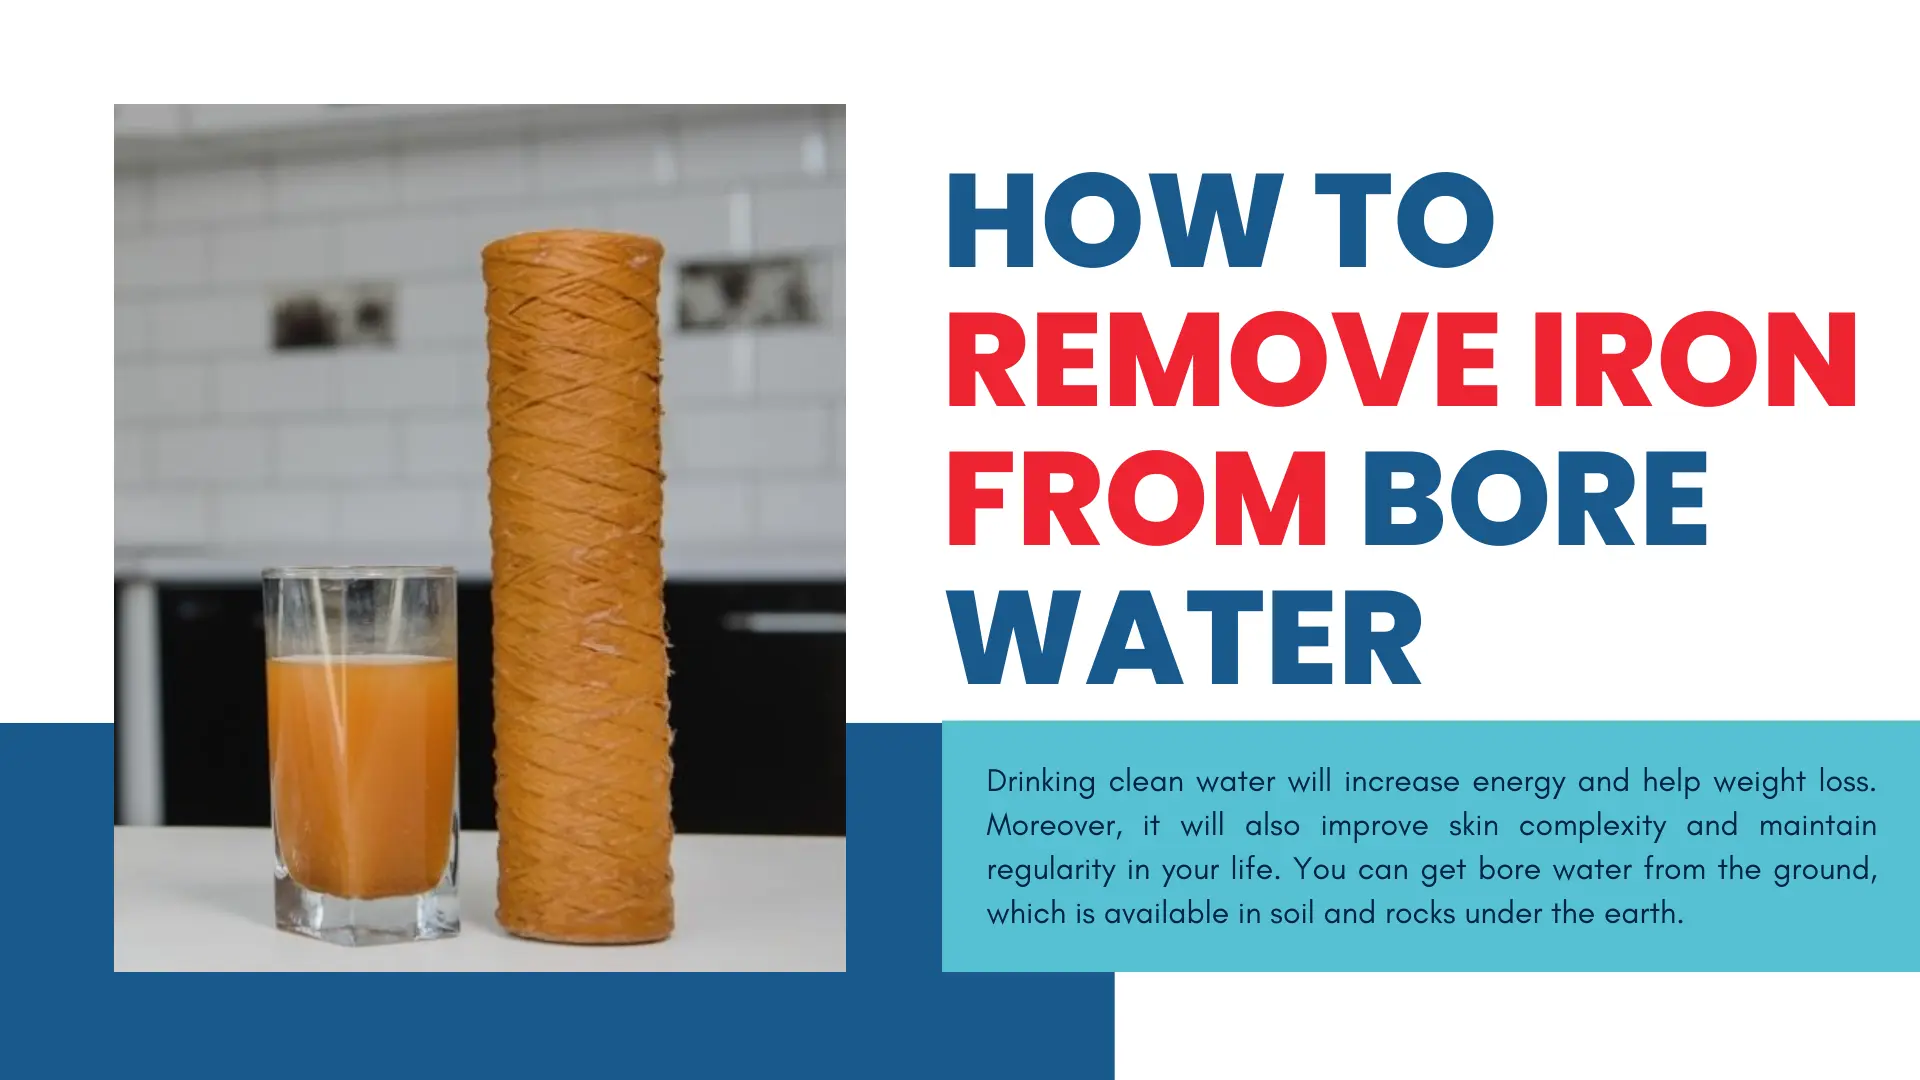 How to Remove Iron From Bore Water